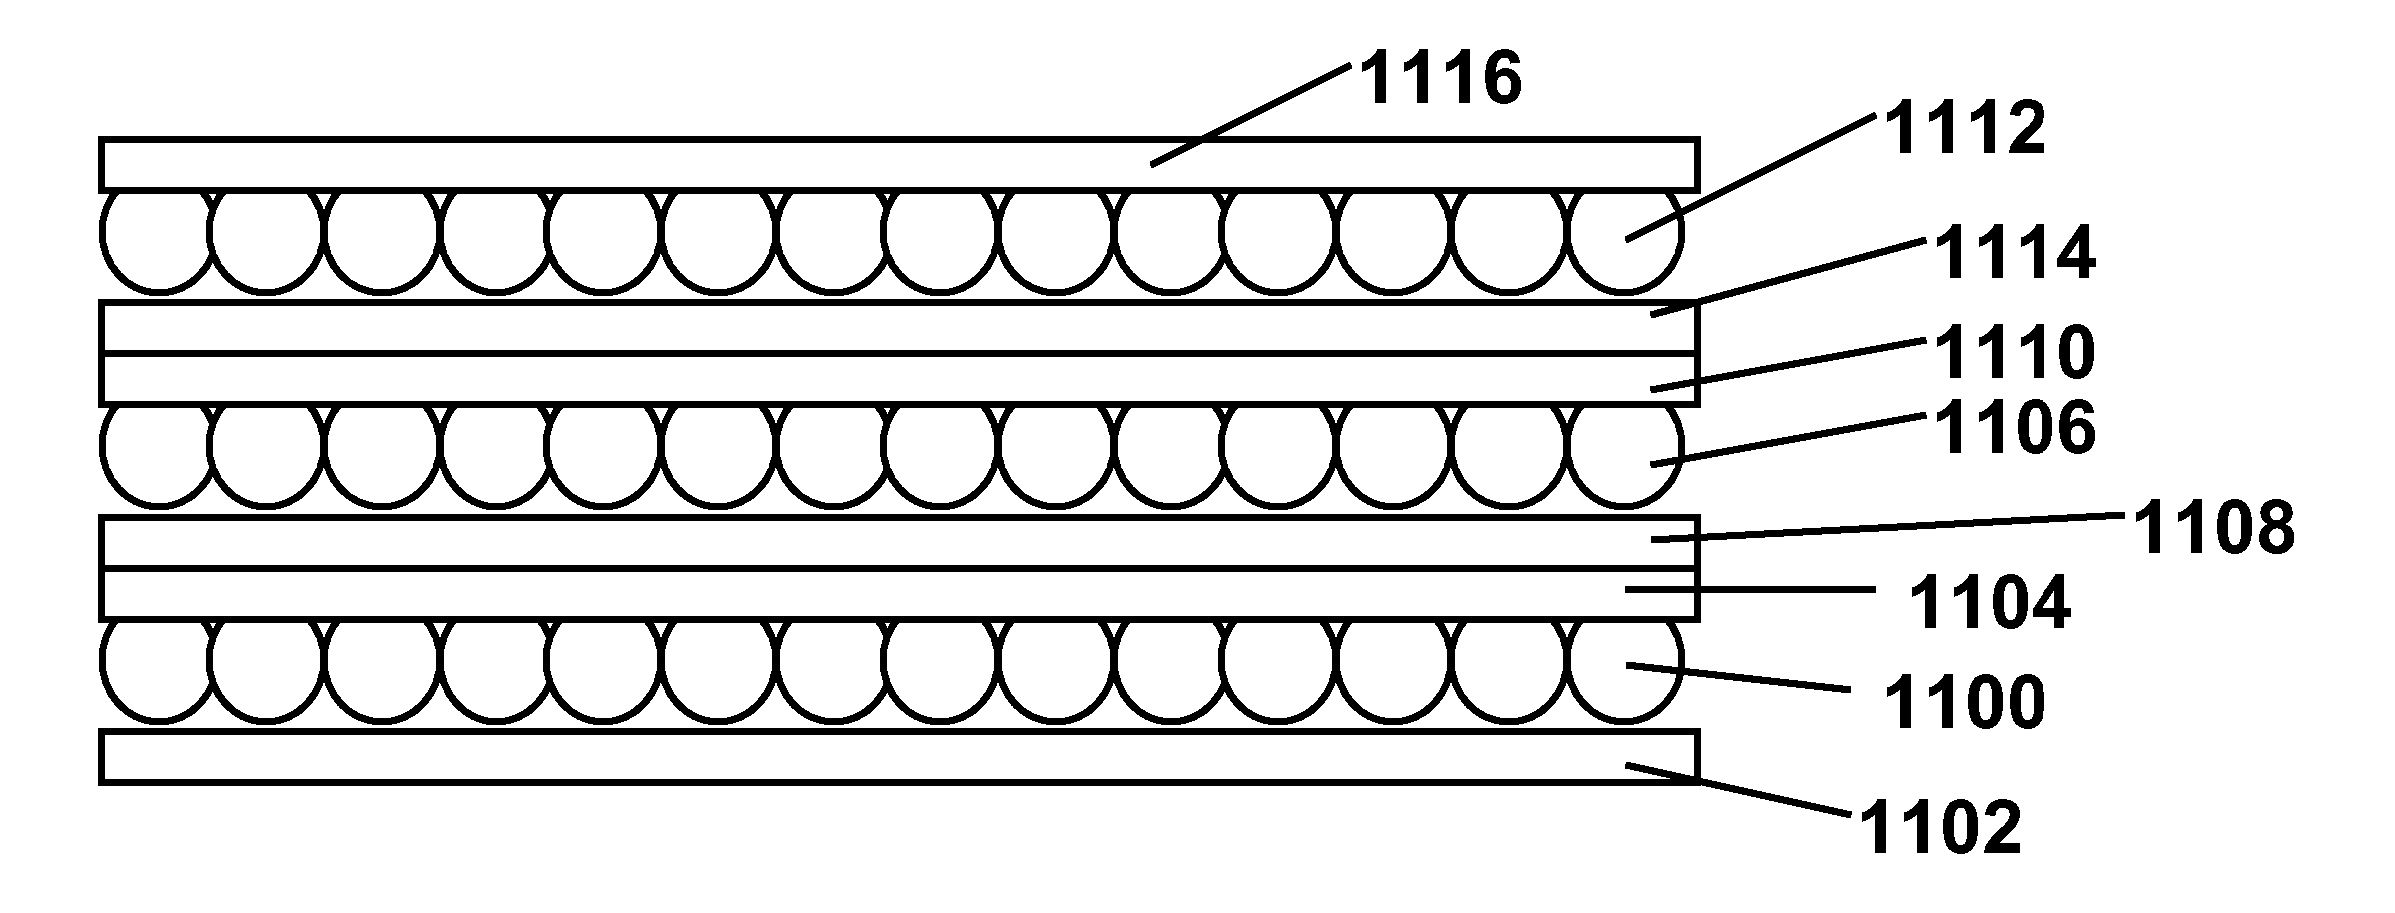 Electro-optic displays, and processes for the production thereof